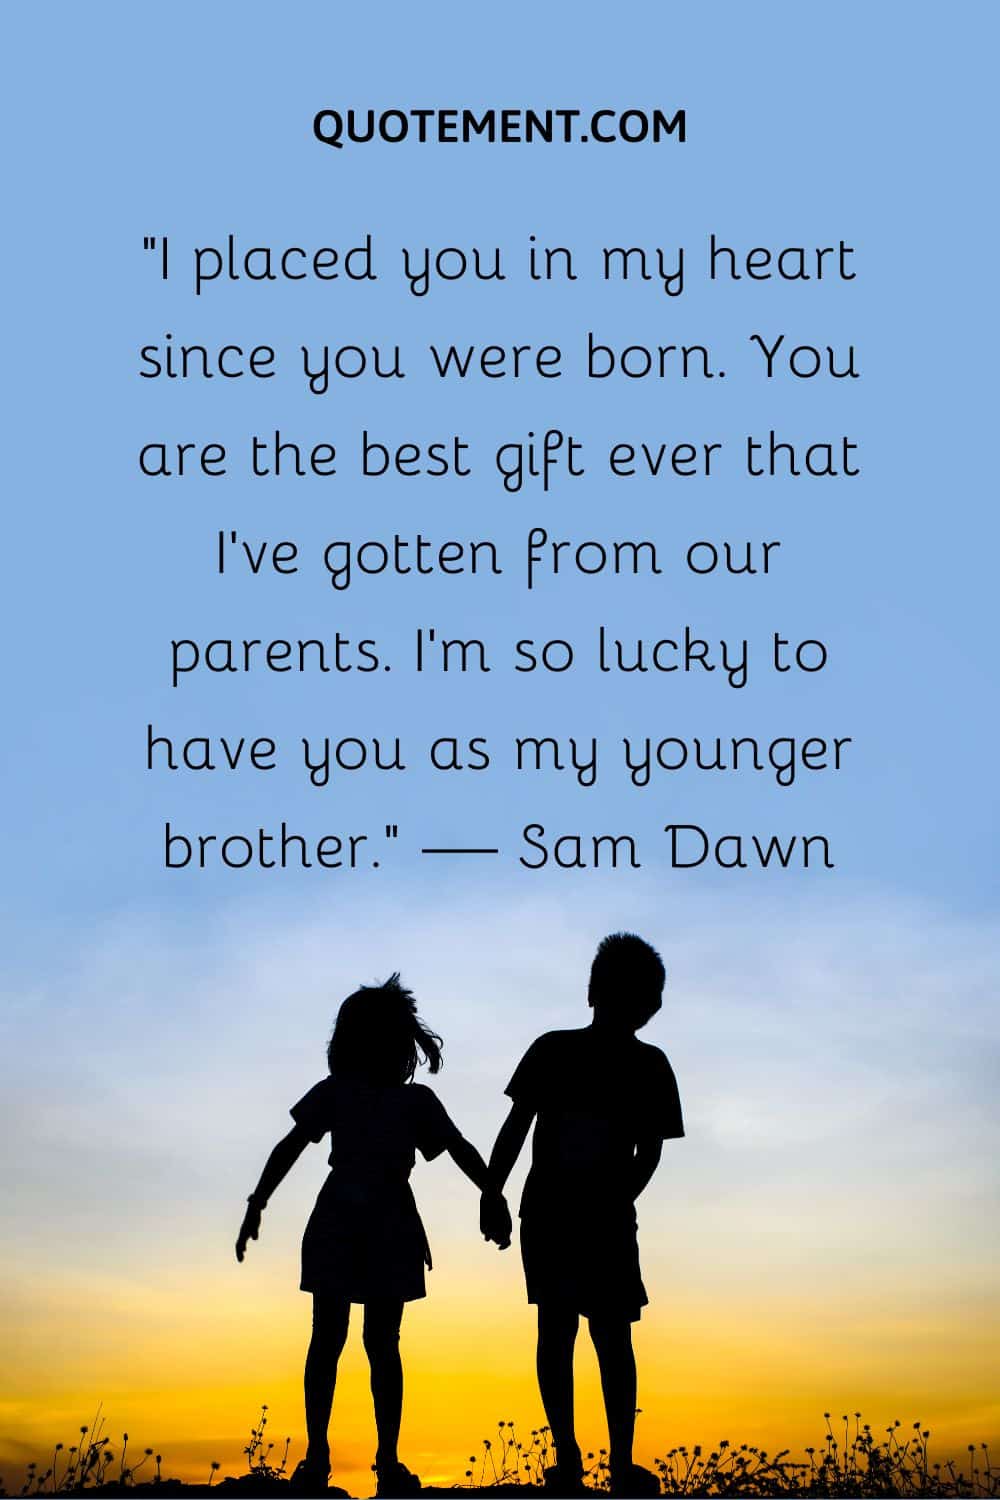 “I placed you in my heart since you were born. You are the best gift ever that I've gotten from our parents. I'm so lucky to have you as my younger brother.” — Sam Dawn